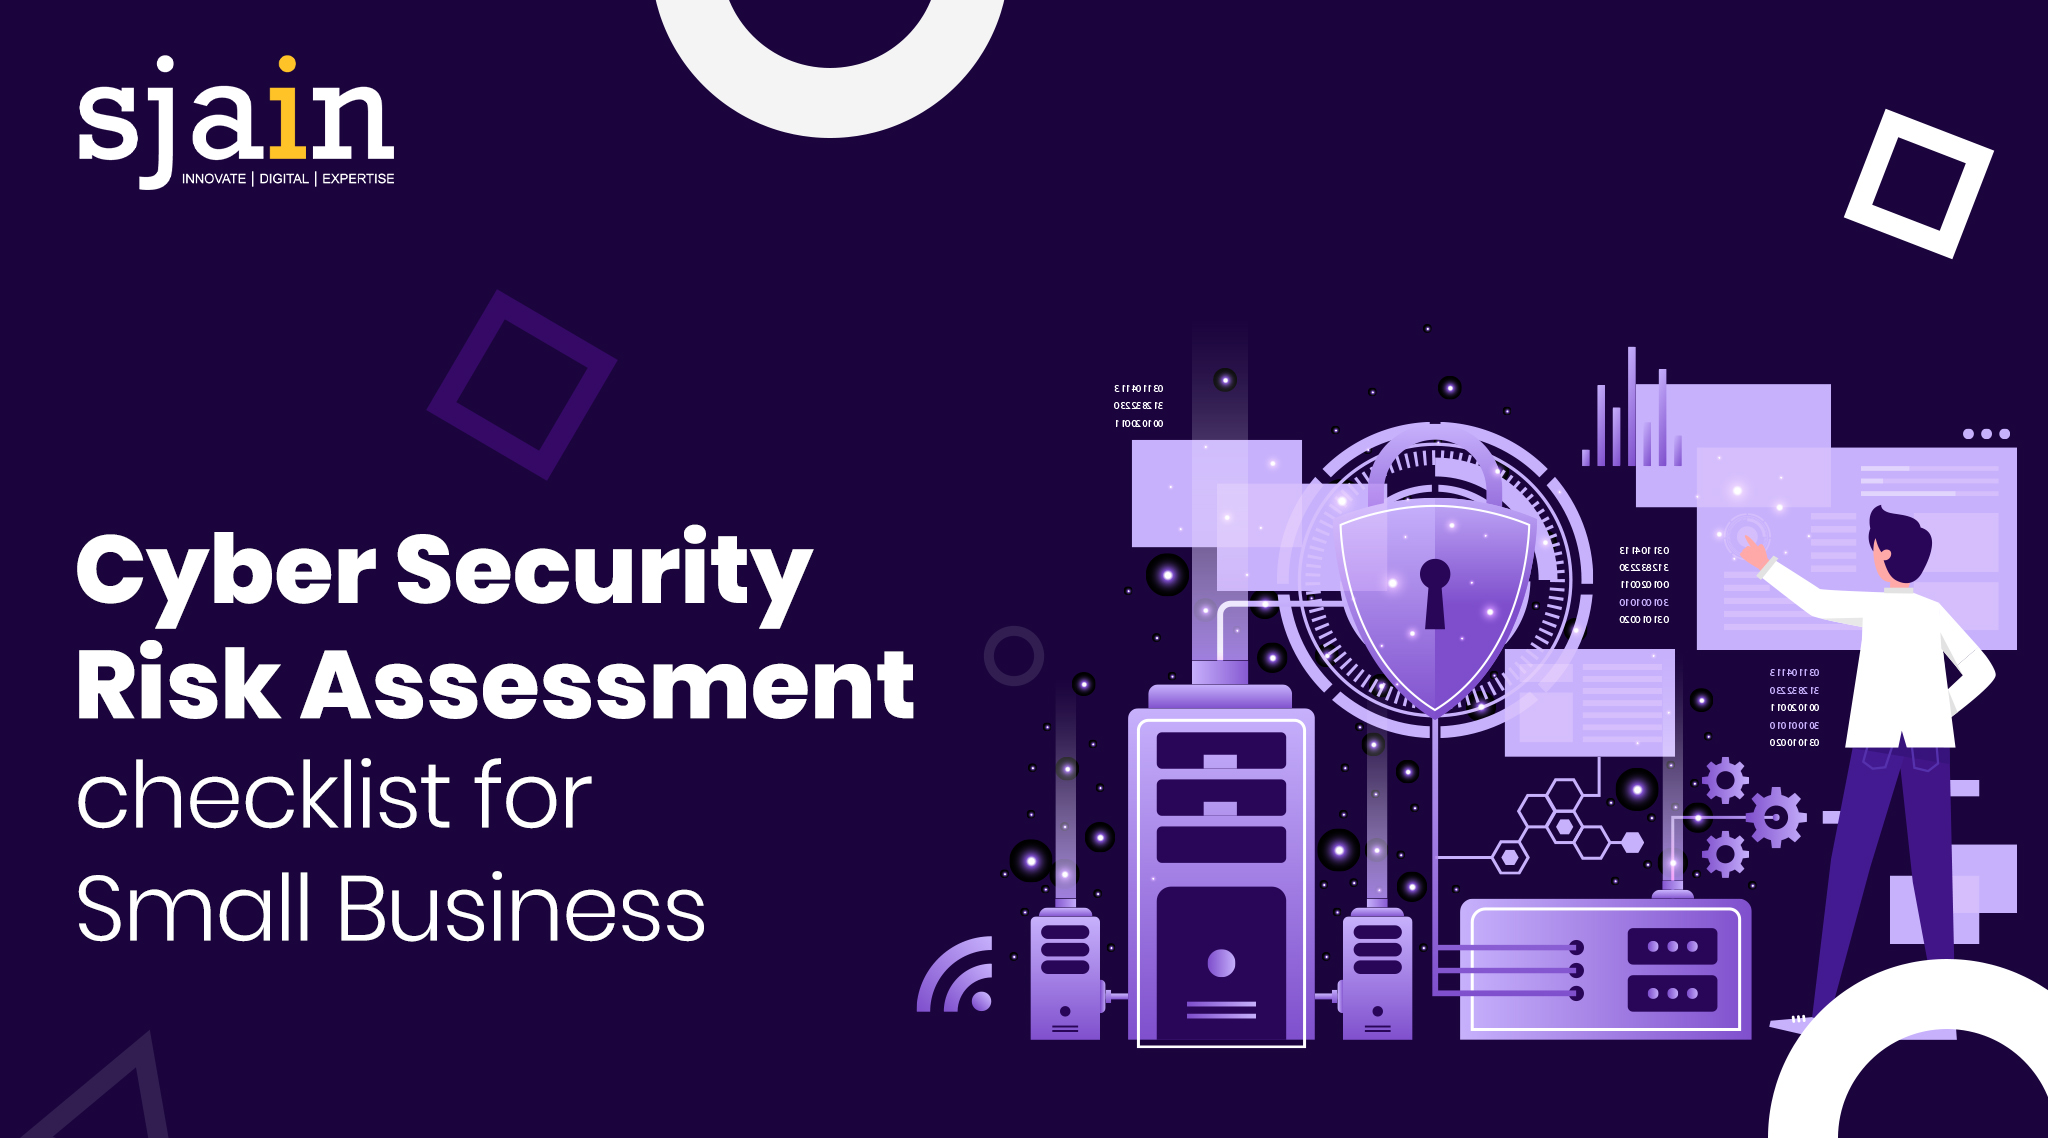 Cyber Security Risk Assessment Checklist for Small Business